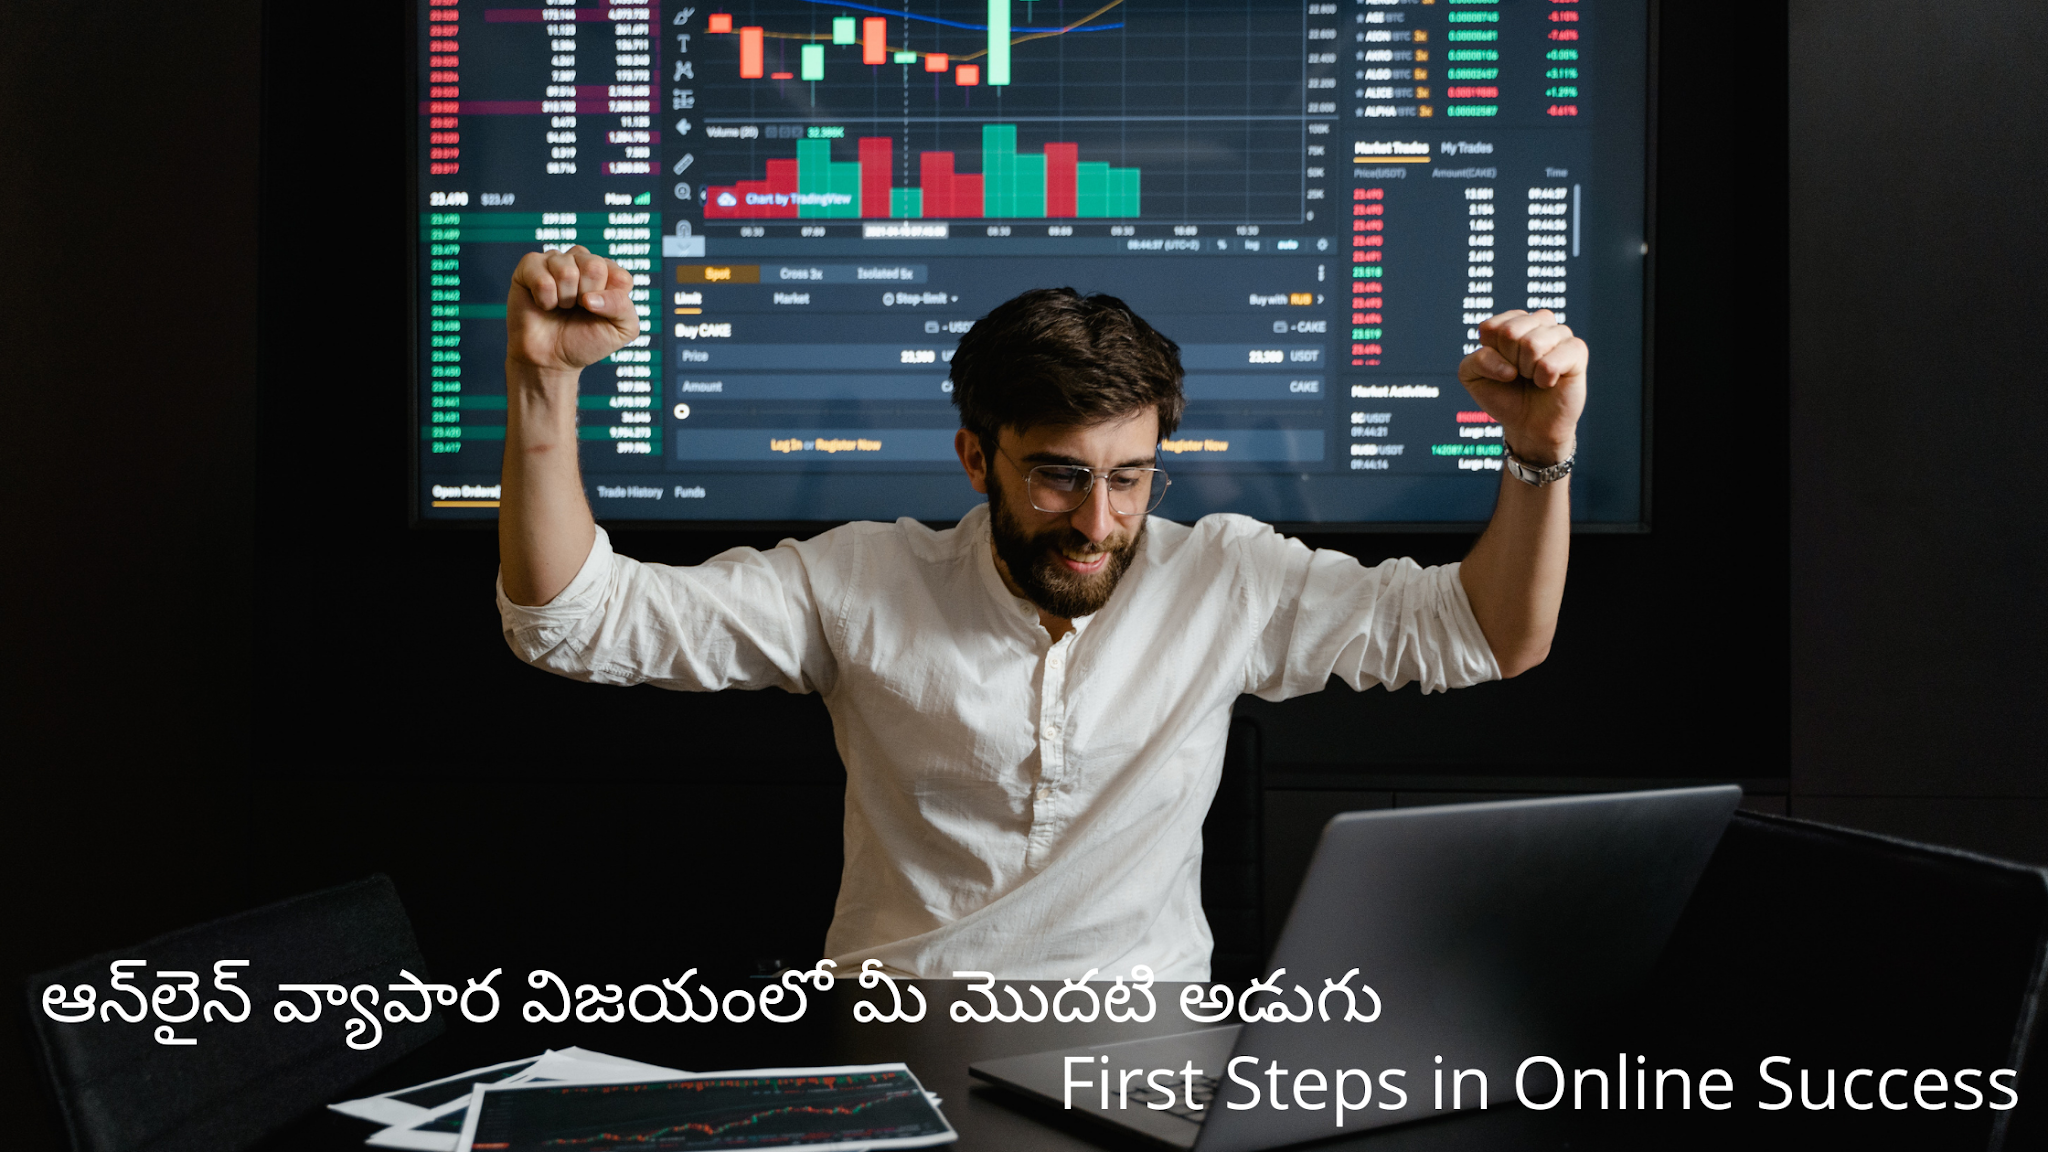 Your First Steps in Online Success